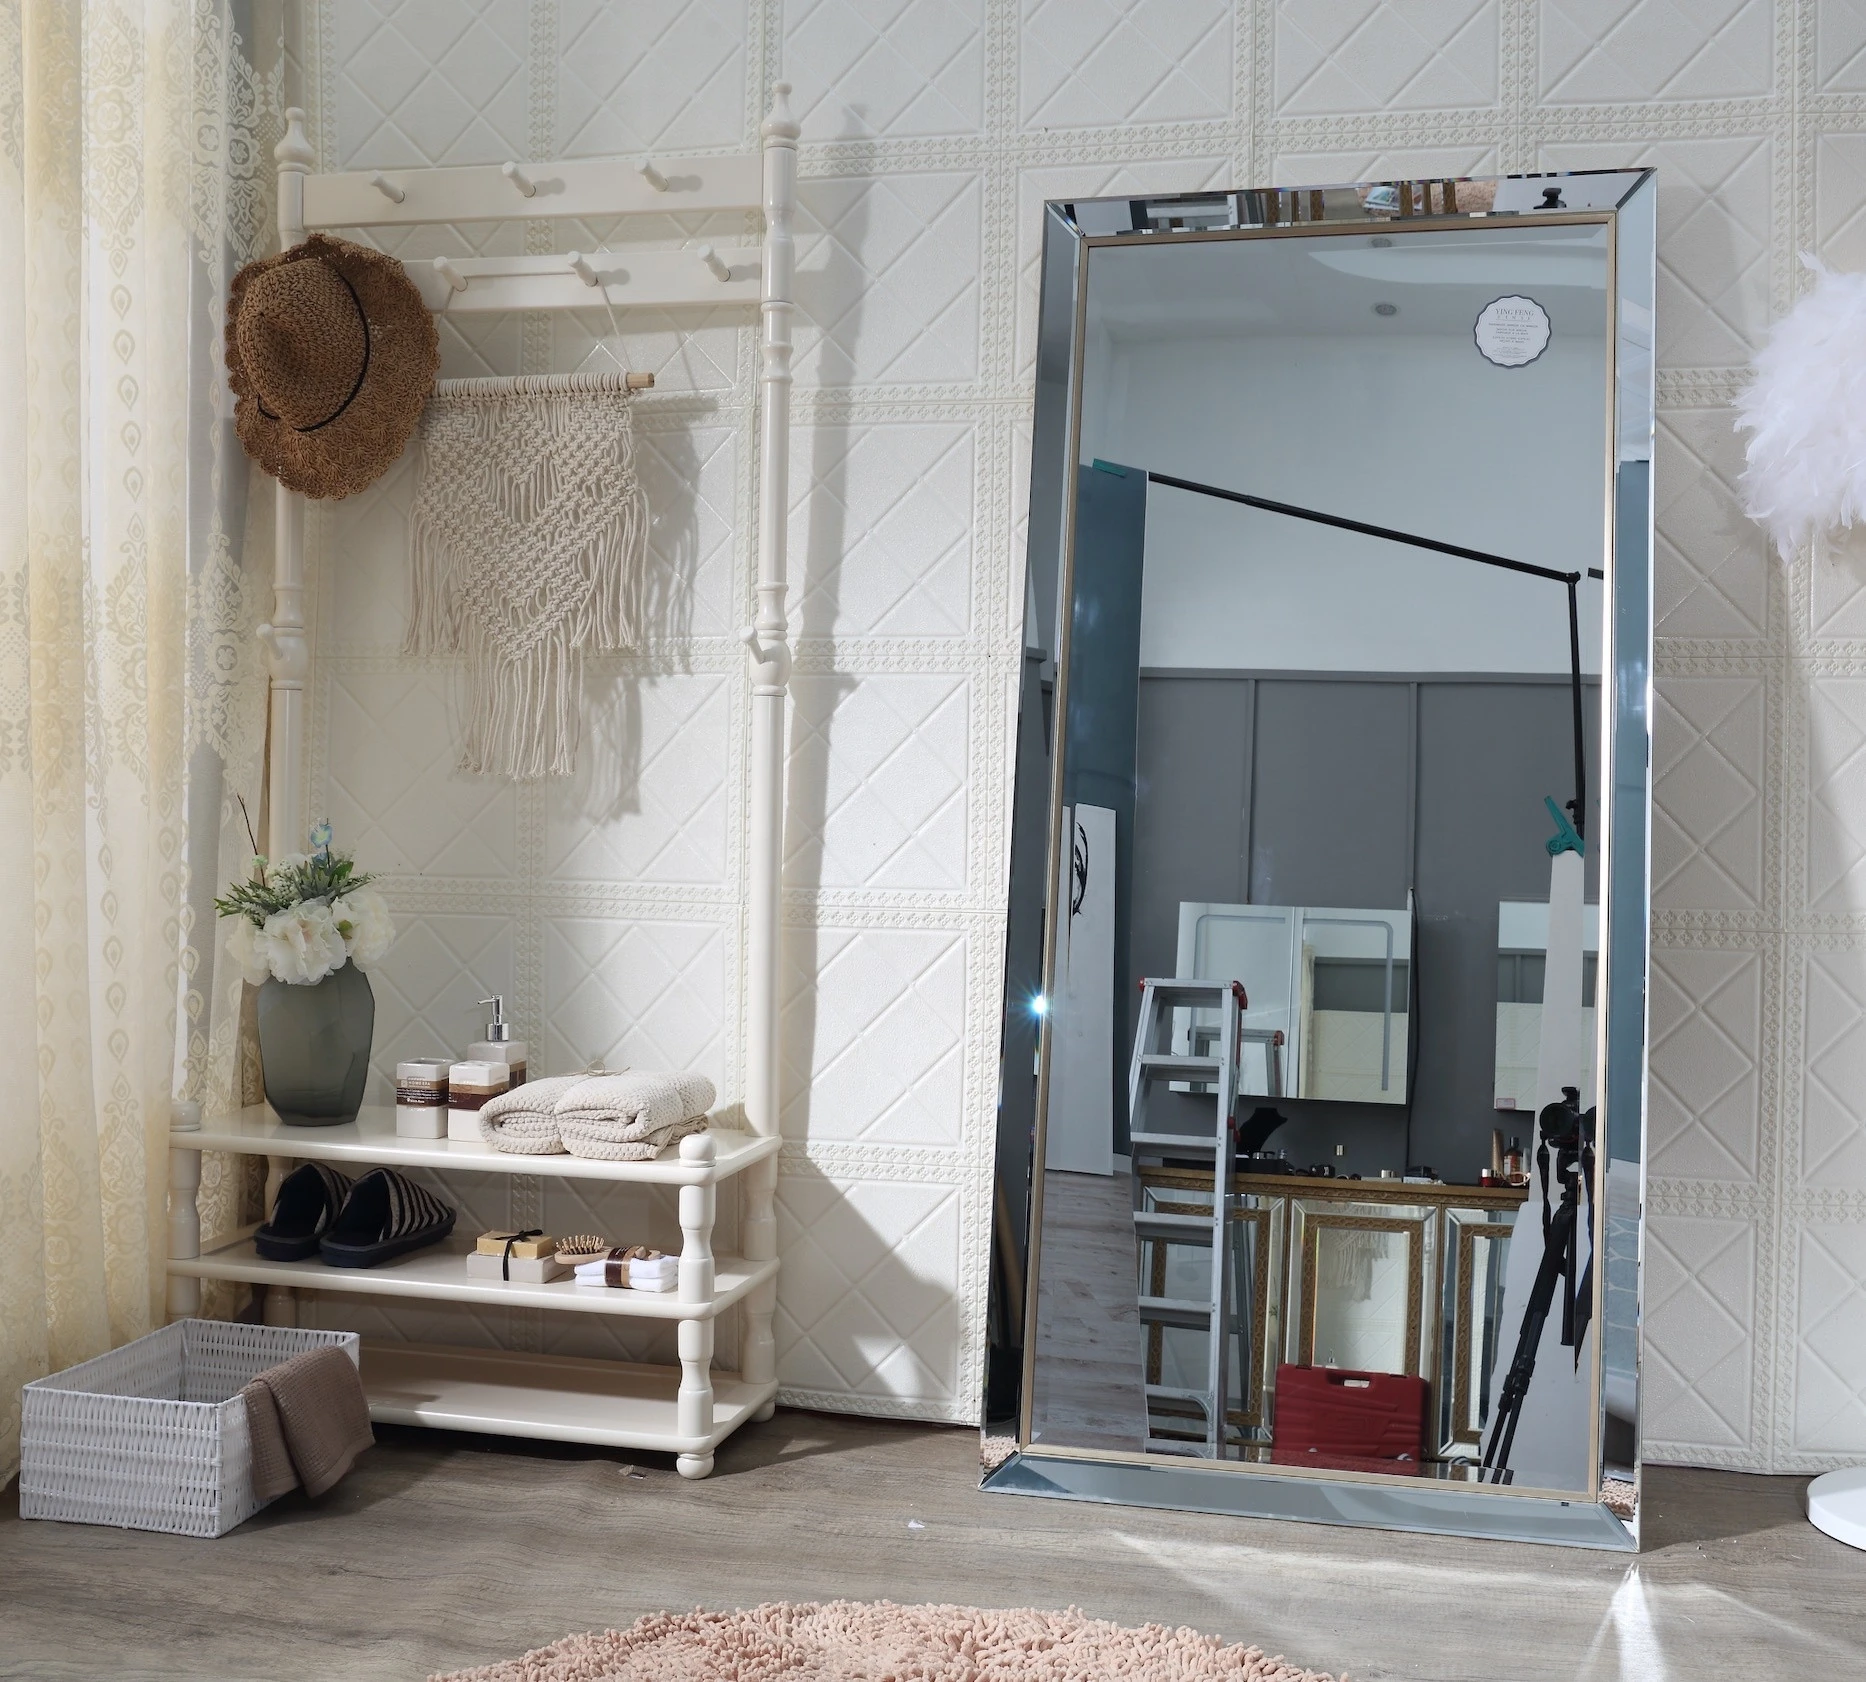 Home decoration is modern and simple style, full-length floor-to-ceiling mirror and mirrorless mirror